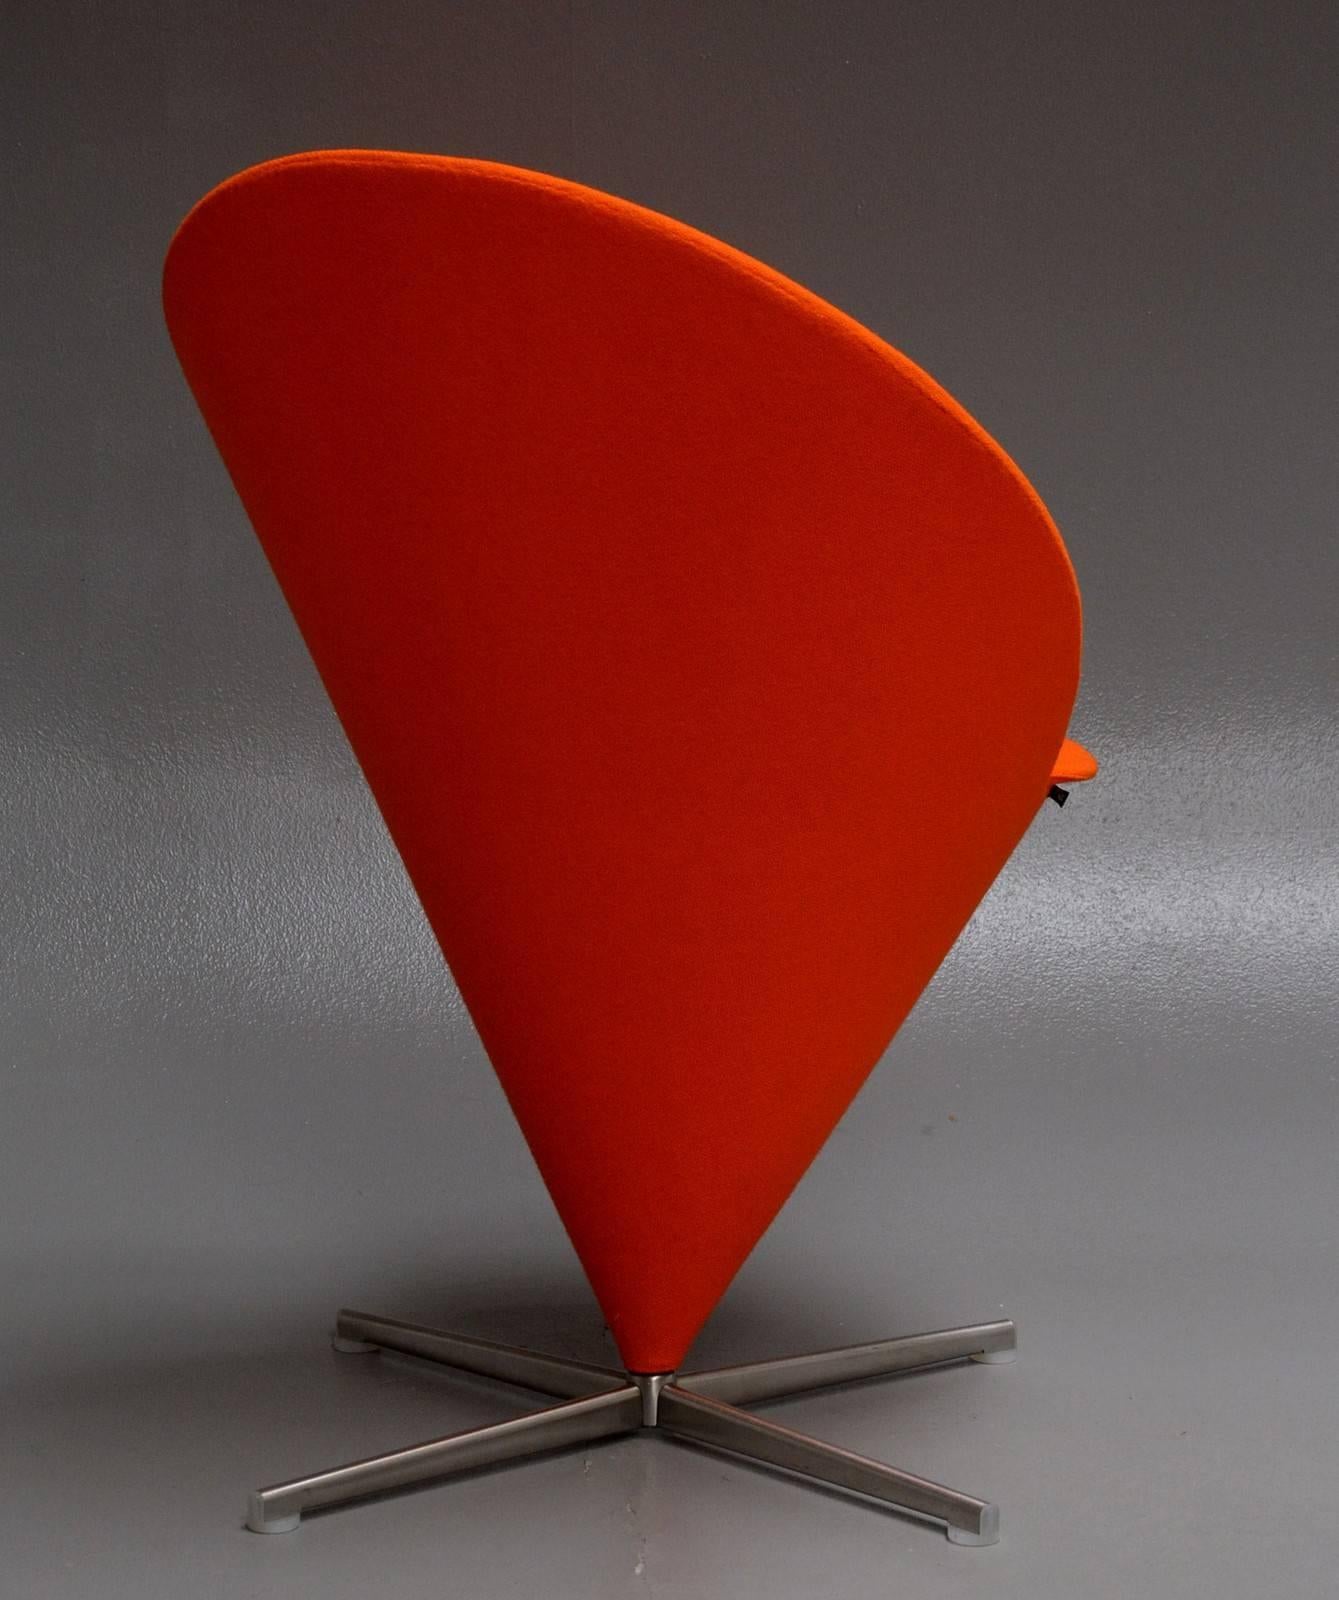 Verner Panton 'Cone Chair'. Completely covered in orange 'Tonus' woolen fabric, satin-brushed stainless steel base. Designed 1959.
Produced by Vitra in Switzerland. Minimal signs of wear.
Literature: 'Verner Panton, The Collected Works, Vitra